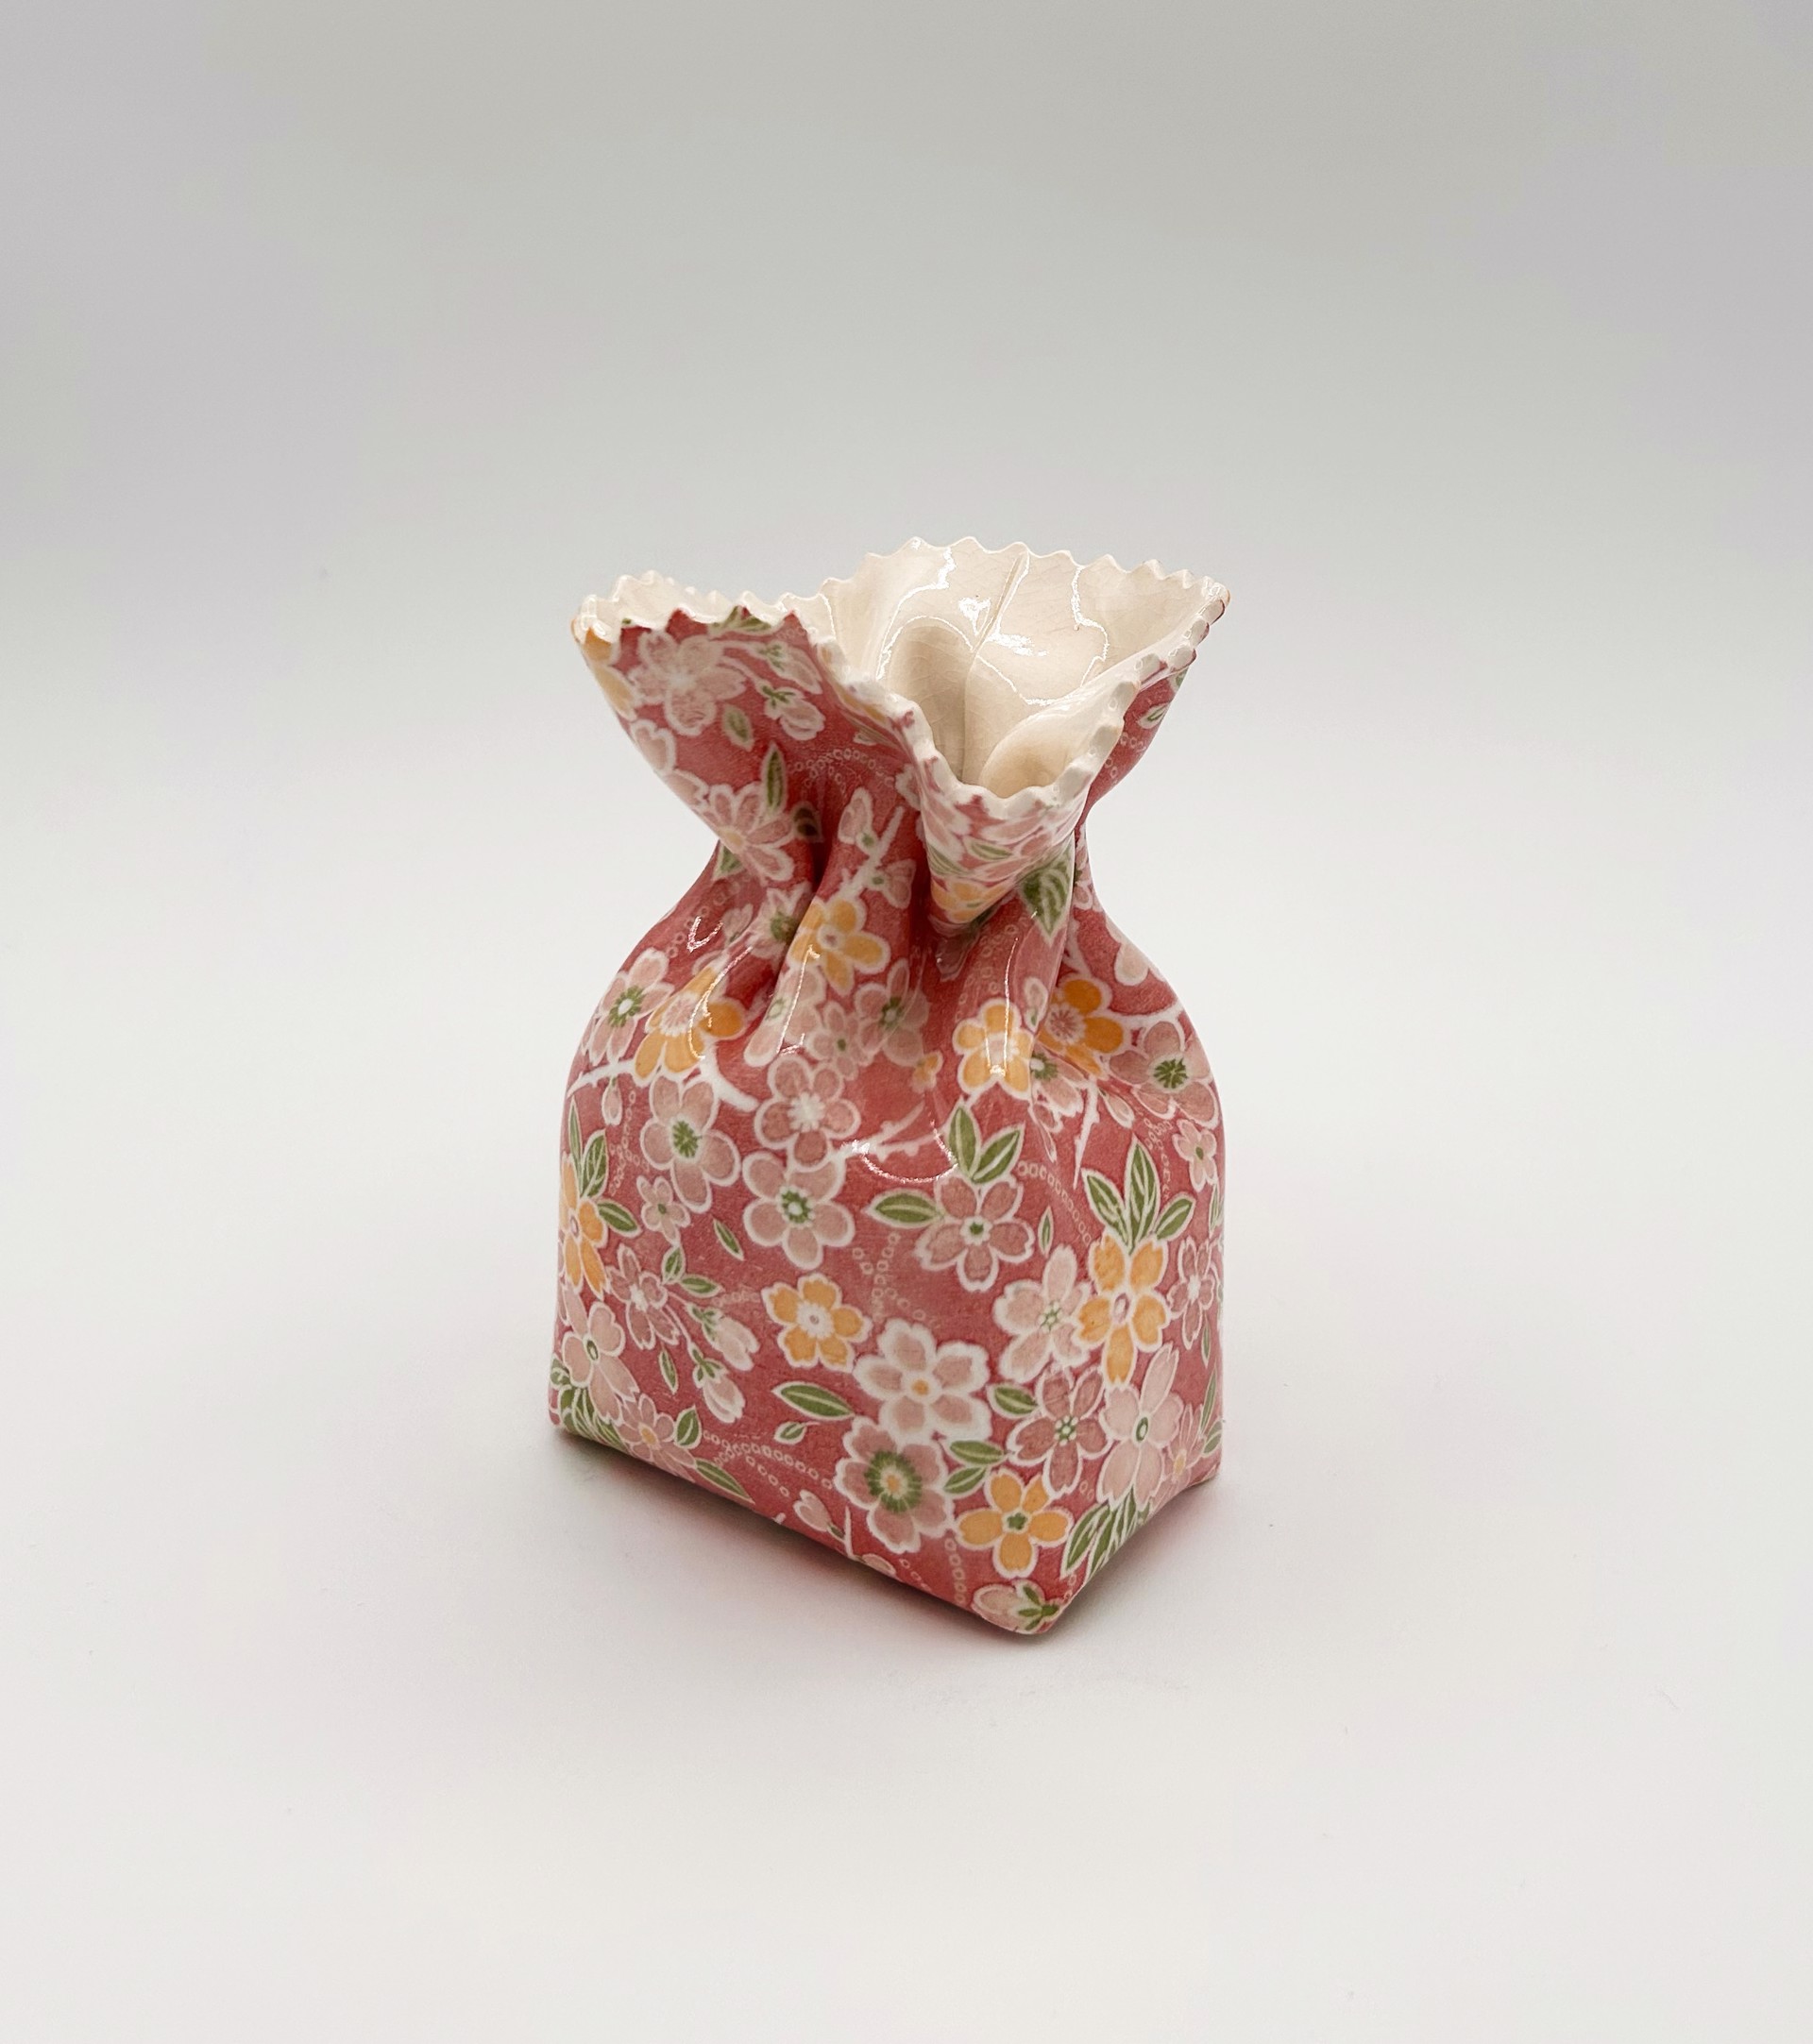 Paper Bag with Flowers by Chandra Beadleston